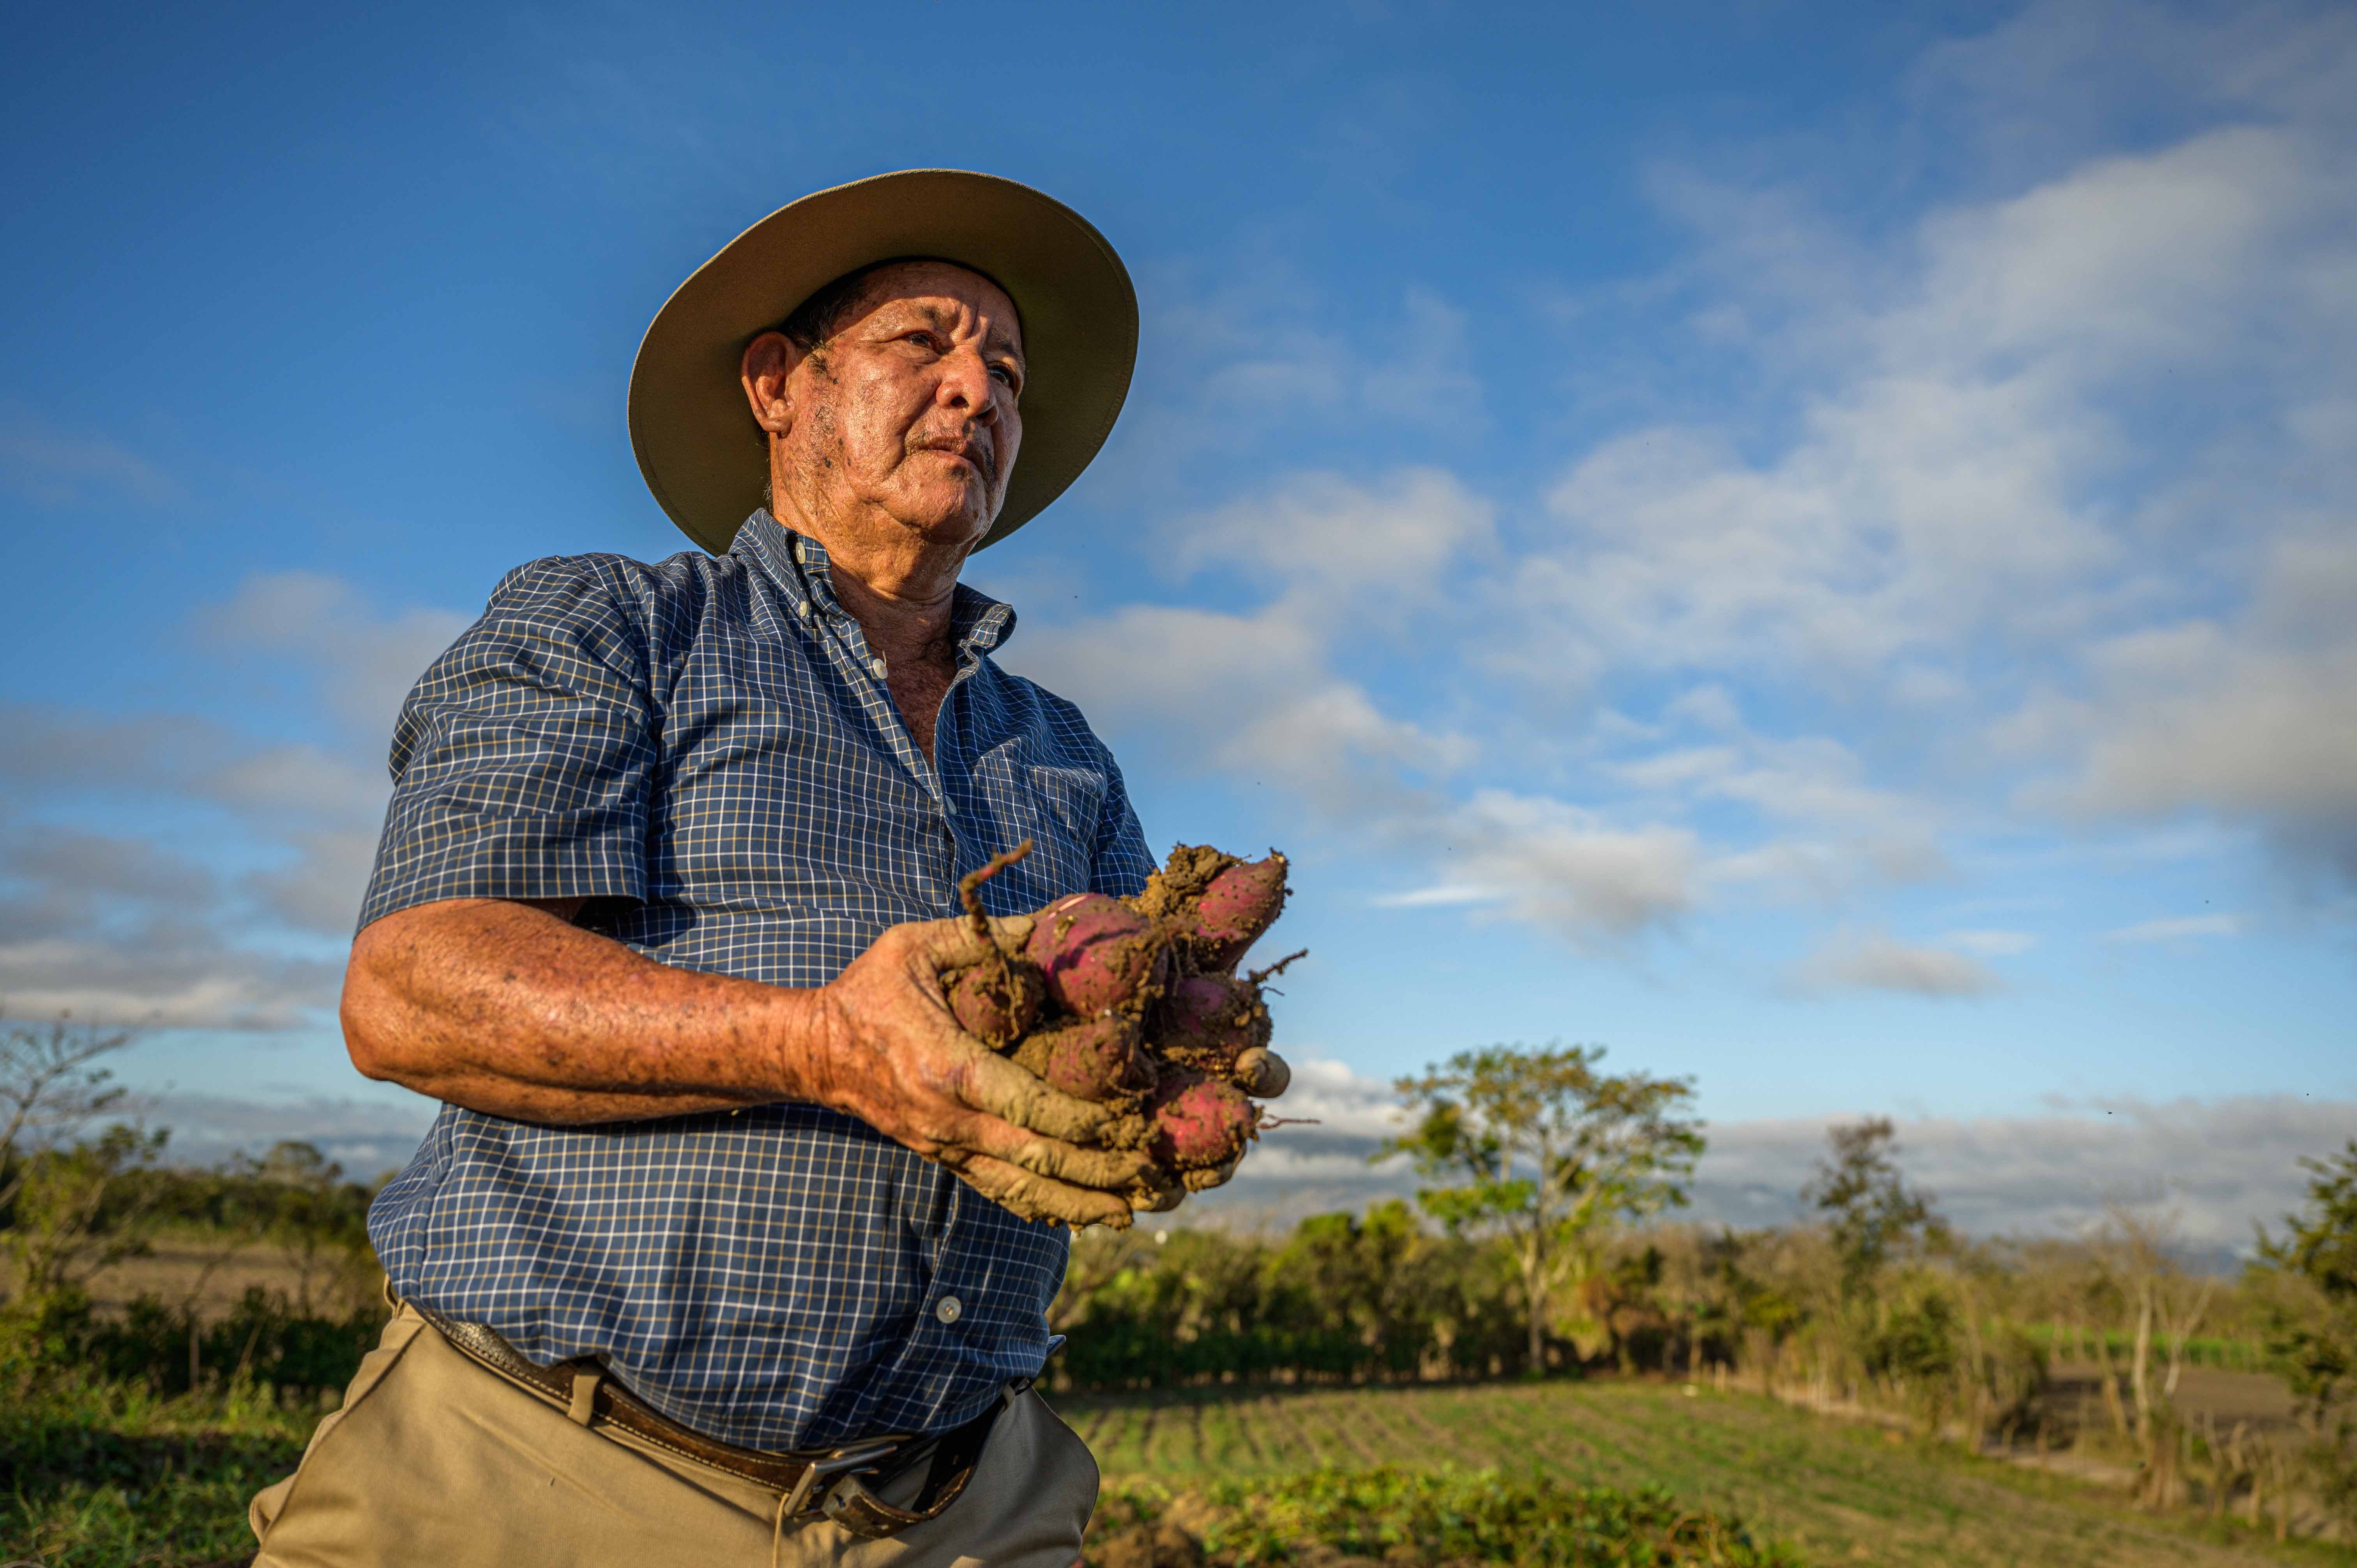 Tulio holds freshly harvested sweet potatoes in his hands.